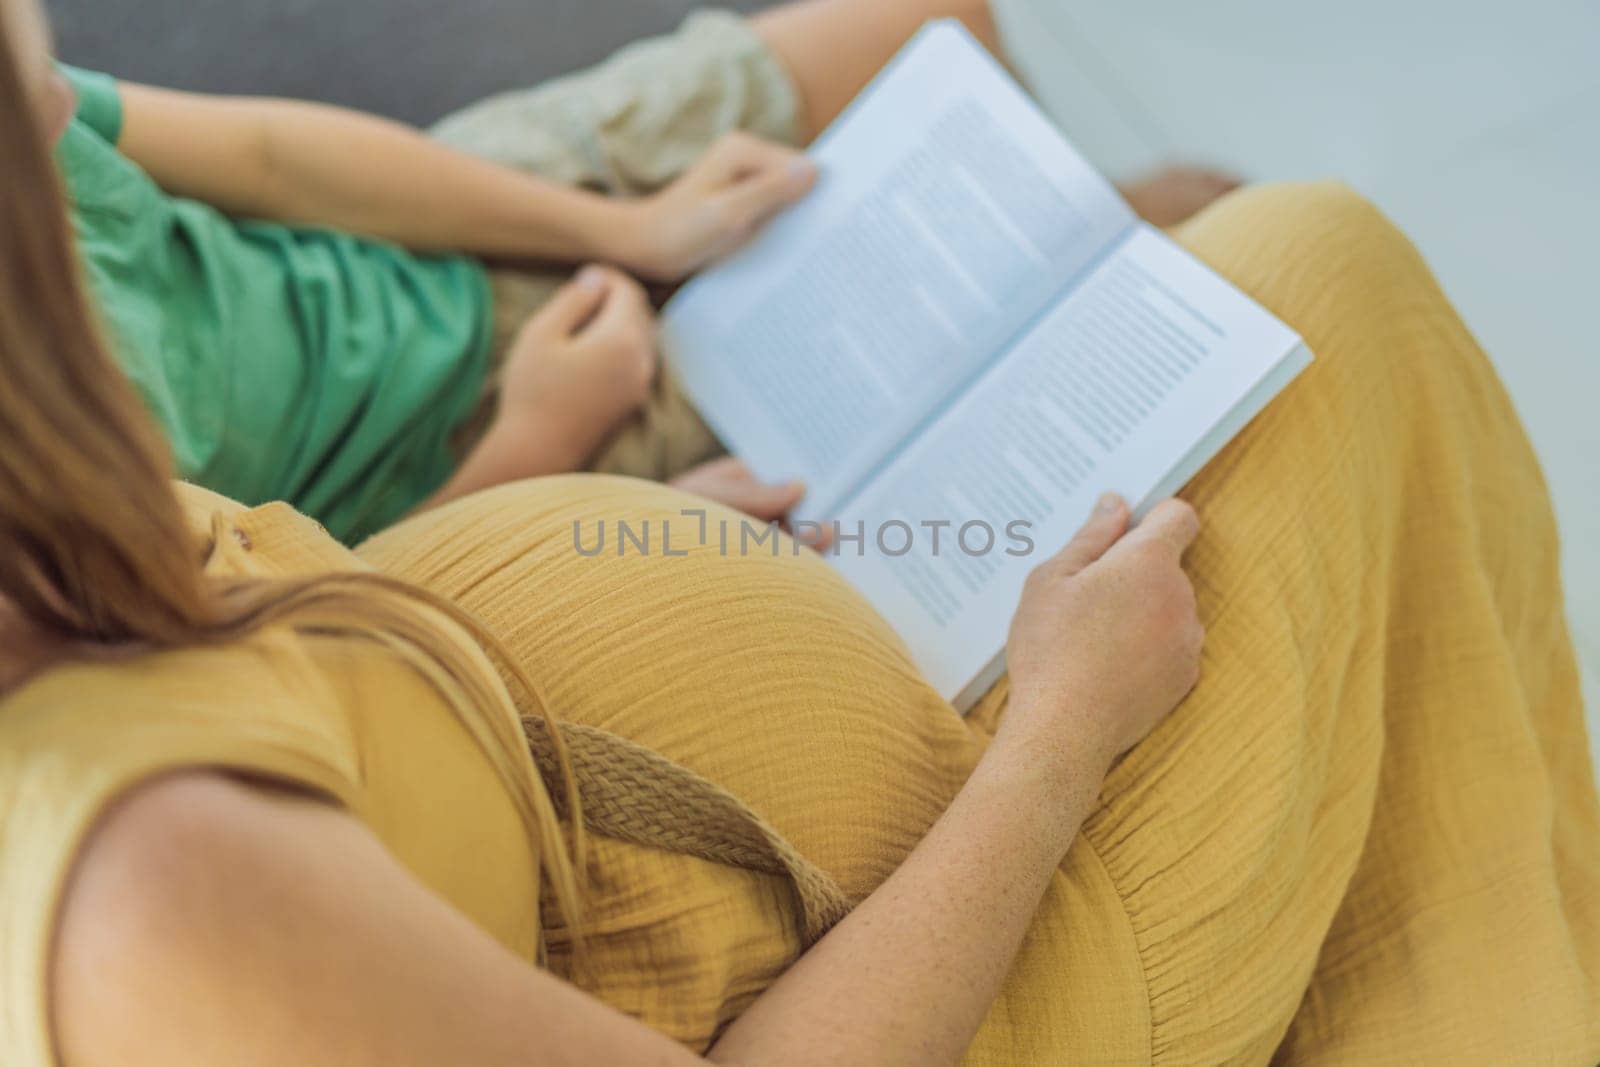 Sweet and bonding moment as a pregnant mother and her son share quality time, immersed in a book, creating cherished memories through the joy of reading together by galitskaya